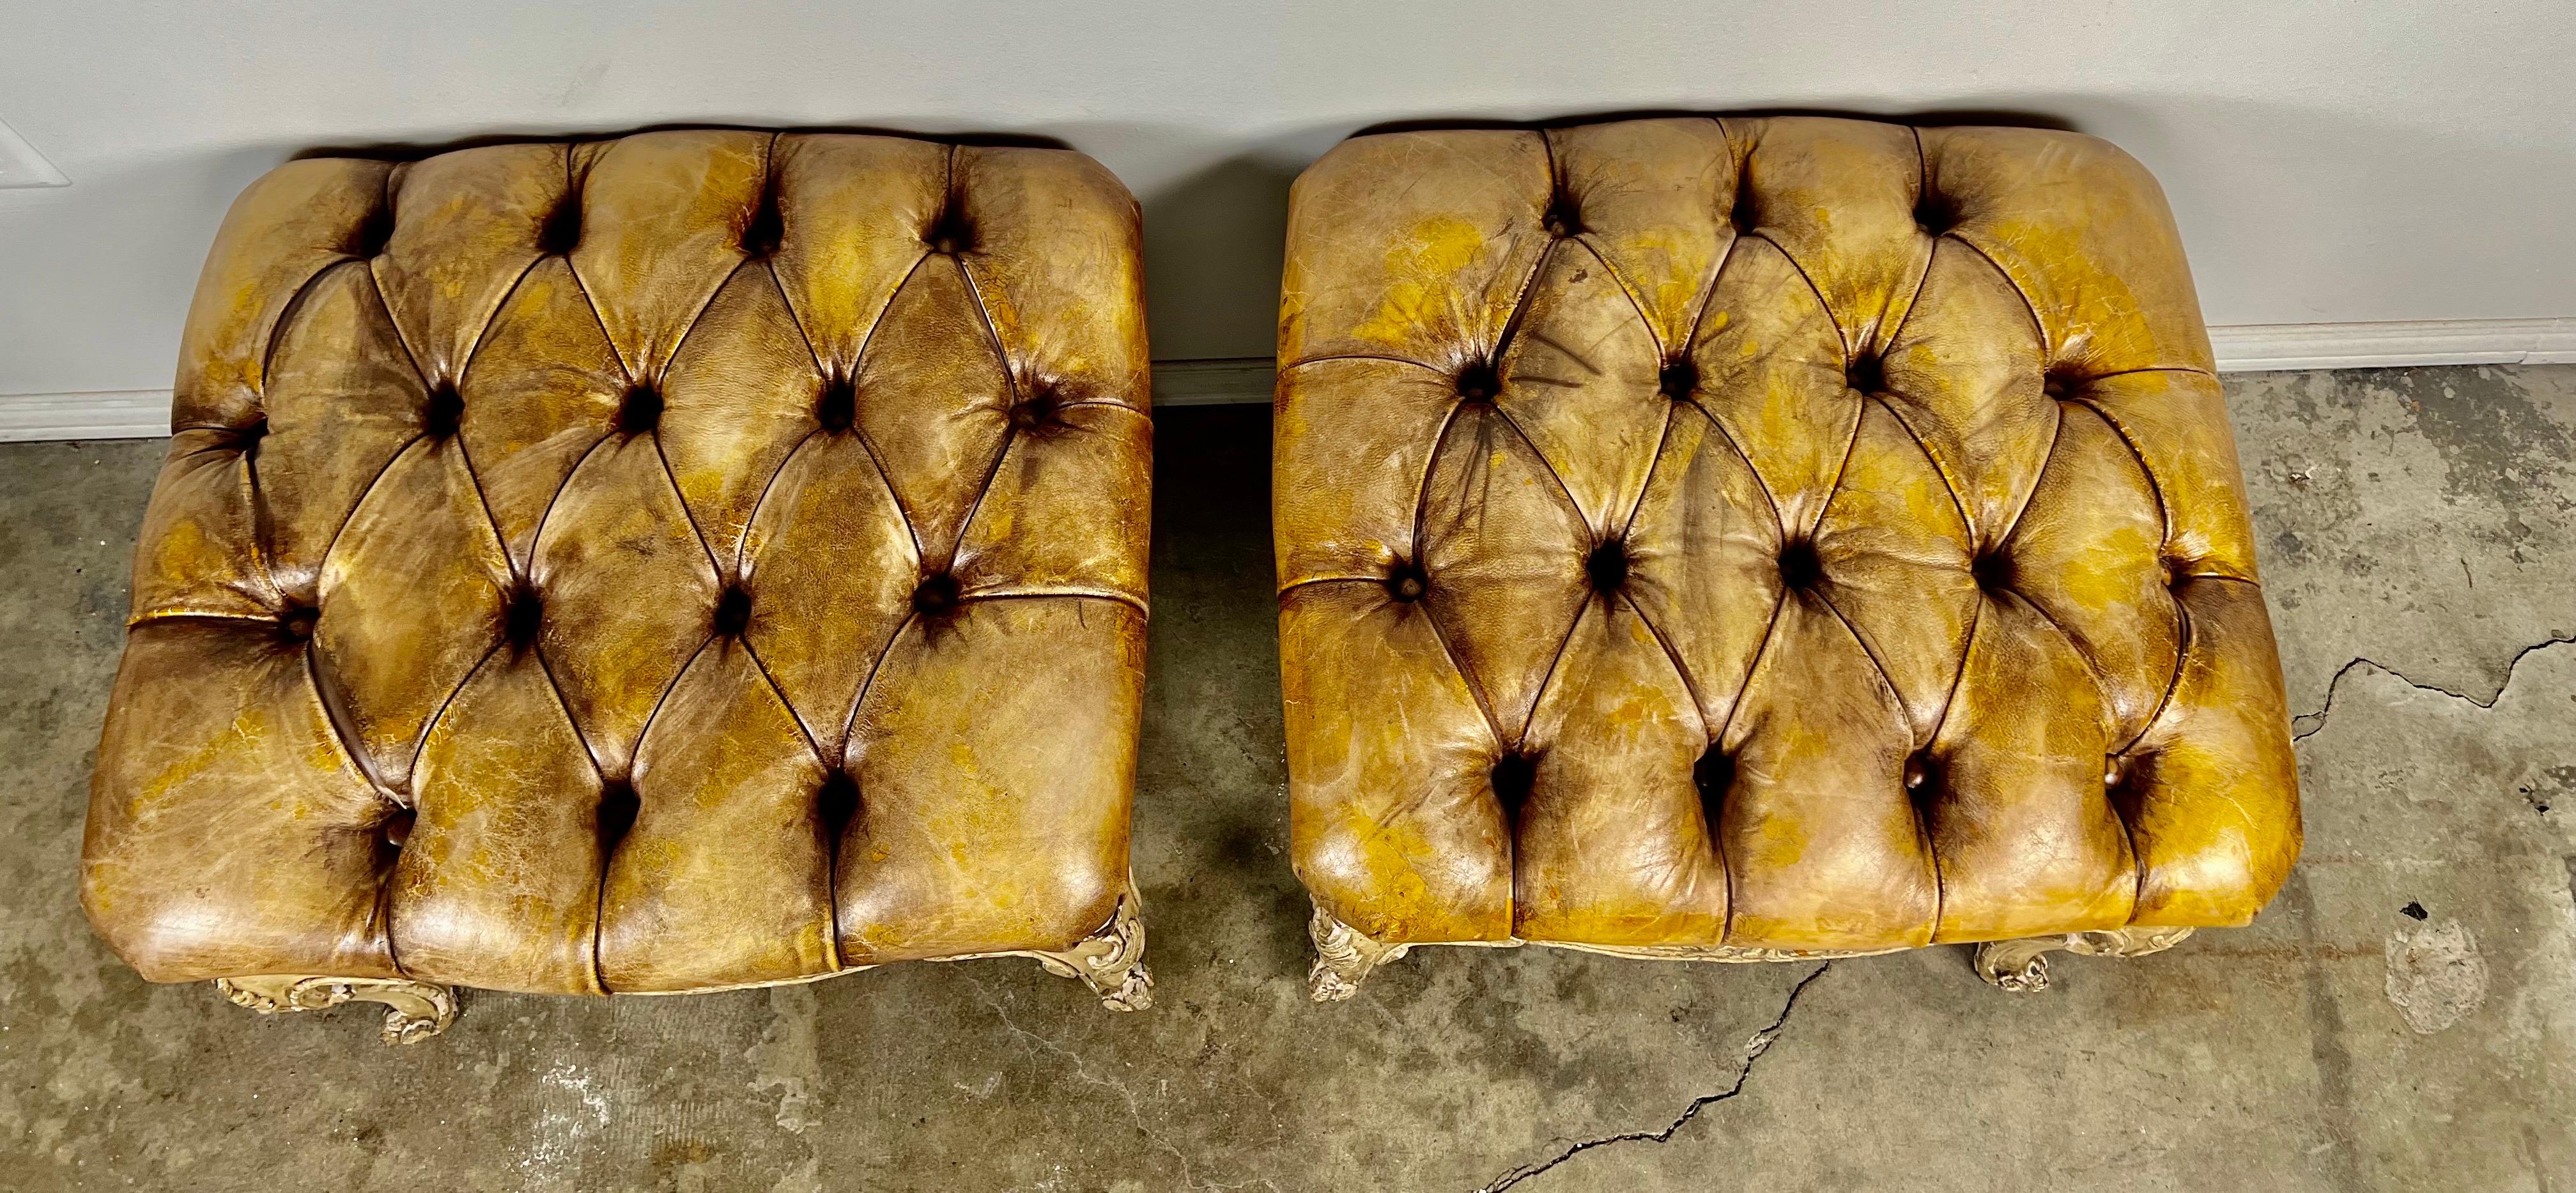 Pair of leather tufted French Louis XV style benches.  There are beautiful carved details throughout.  The bench stands on four cabriole legs that end in rams head feet.  They are upholstered in leather that has some wear but no tears or damage.  It